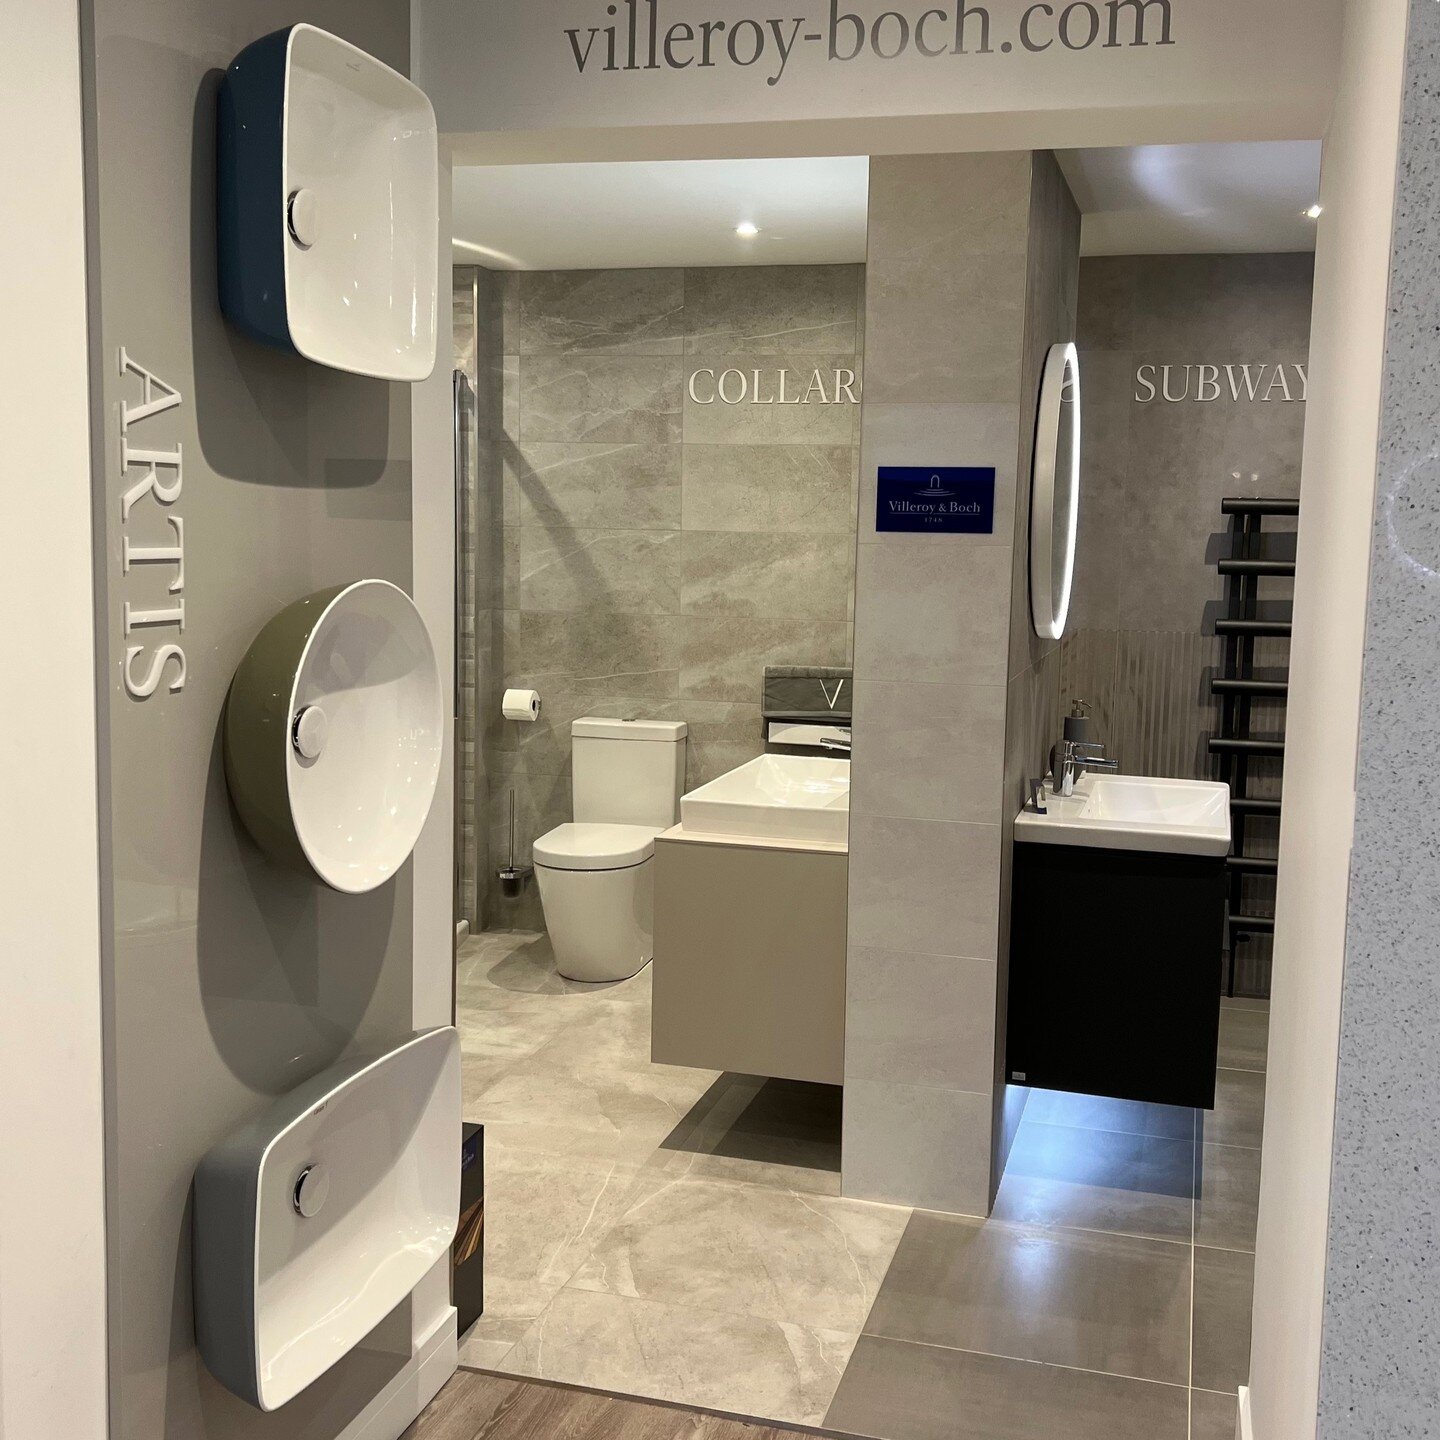 Have you visited our newly refurbished Villeroy &amp; Boch showroom yet? Get in touch to book an appointment with one of our dedicated designers. 
With a huge range of Villeroy &amp; Boch products on offer, we can help you to design your perfect bath